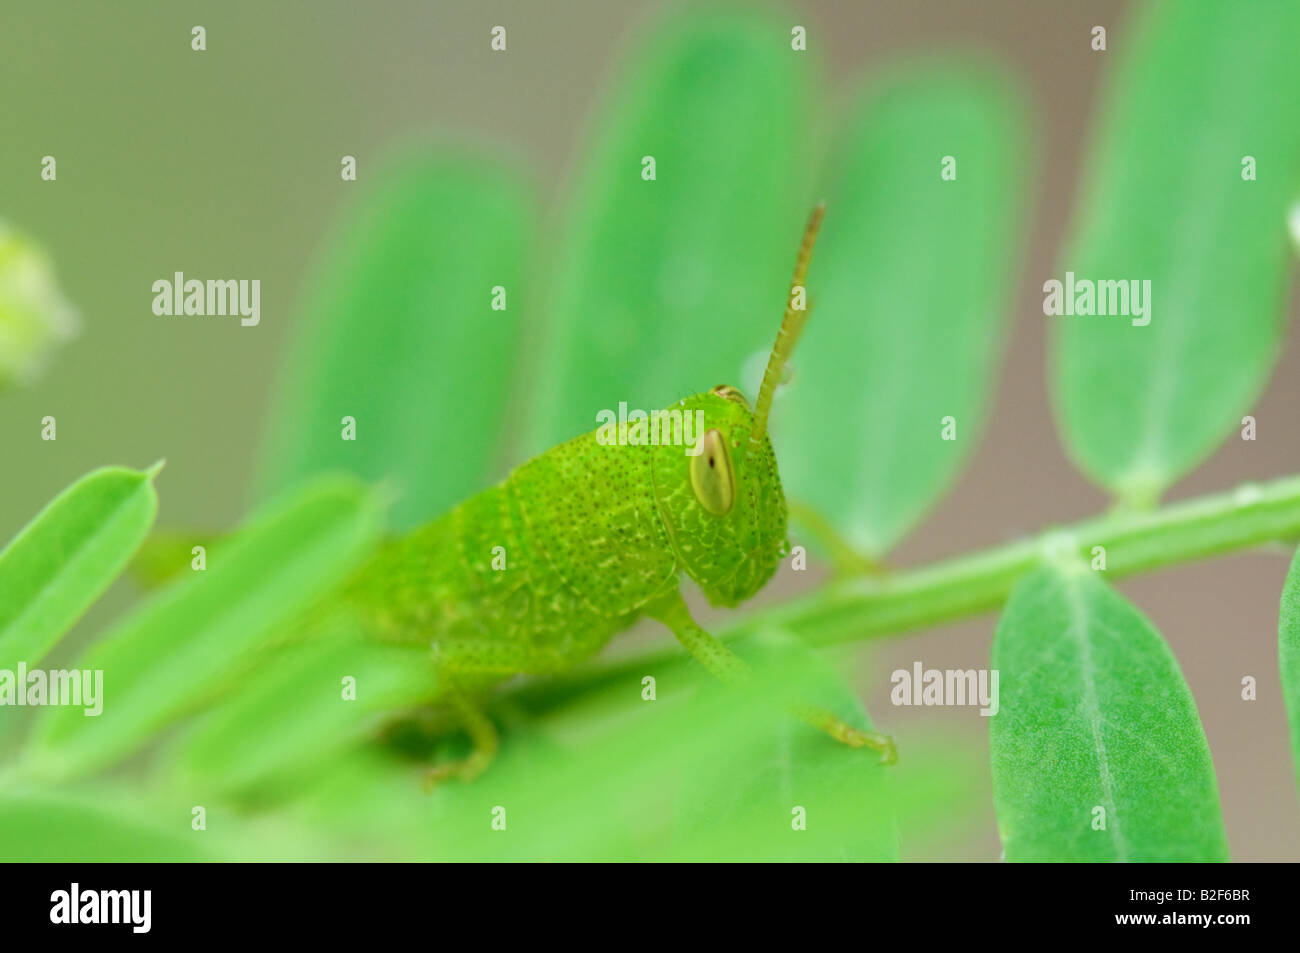 The closeup view of grasshopper on leafs Stock Photo